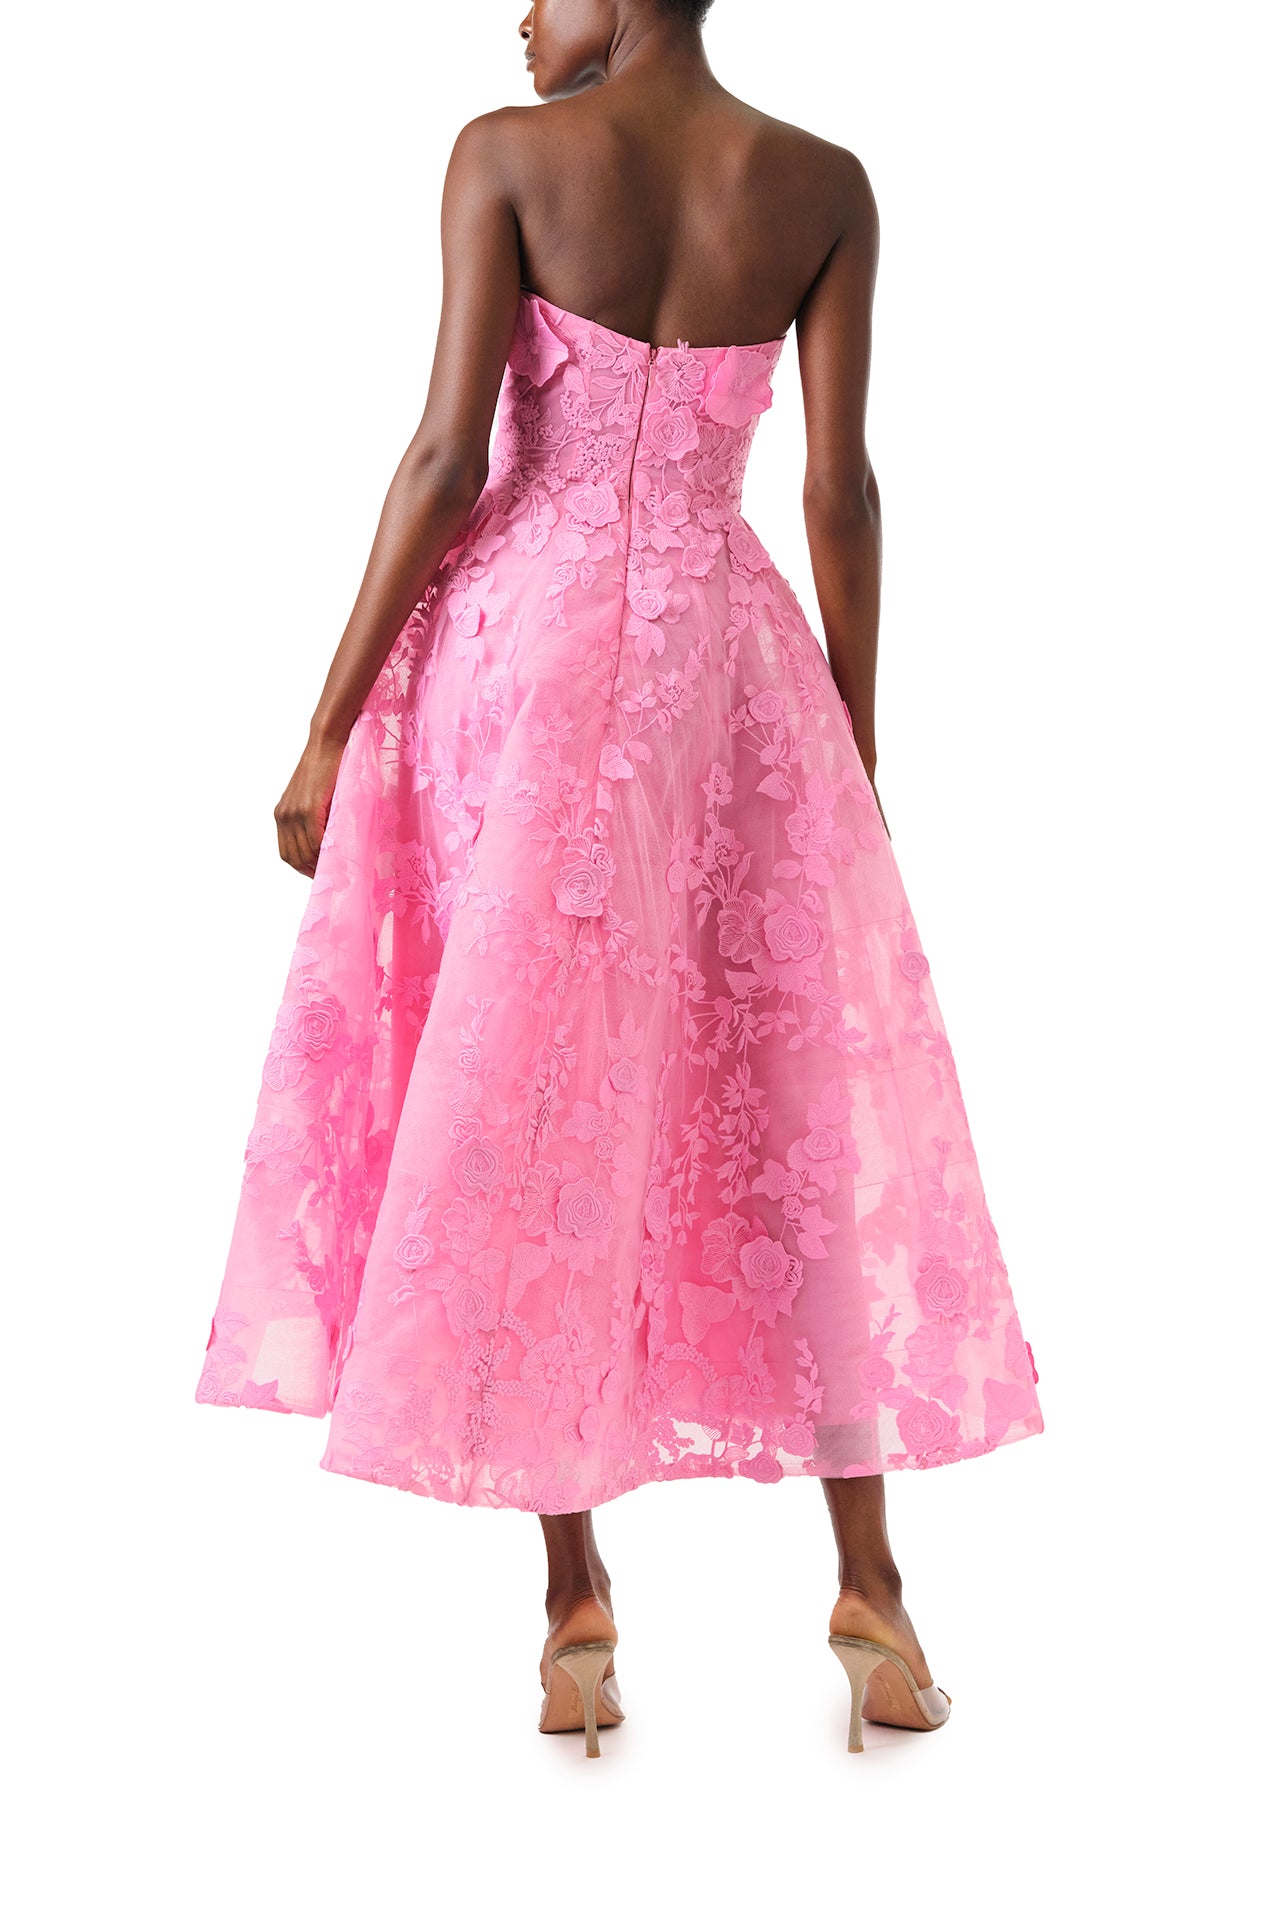 Monique Lhuillier Fall 2024 tea-length, strapless dress in pink 3D lace with full skirt and fitted sweetheart bodice - back.